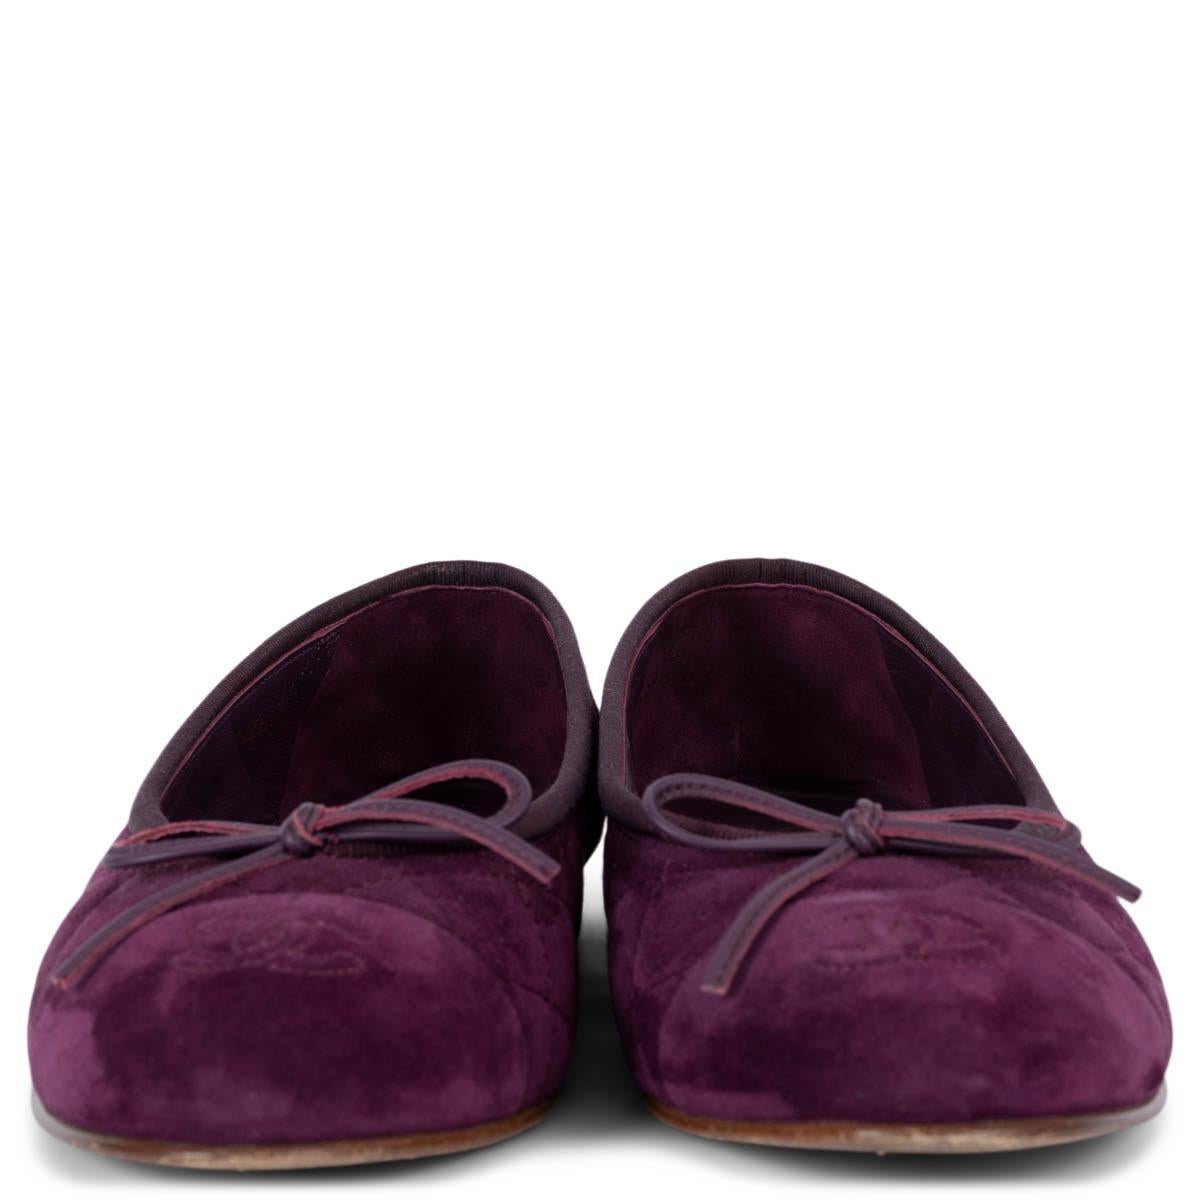 100% authentic Chanel CC quilted classic flats in purple suede with grosgrain trim. Have been worn and are in excellent condition. 

Measurements
Model	REV G26250
Imprinted Size	38.5
Shoe Size	38
Inside Sole	24.5cm (9.6in)
Width	8cm